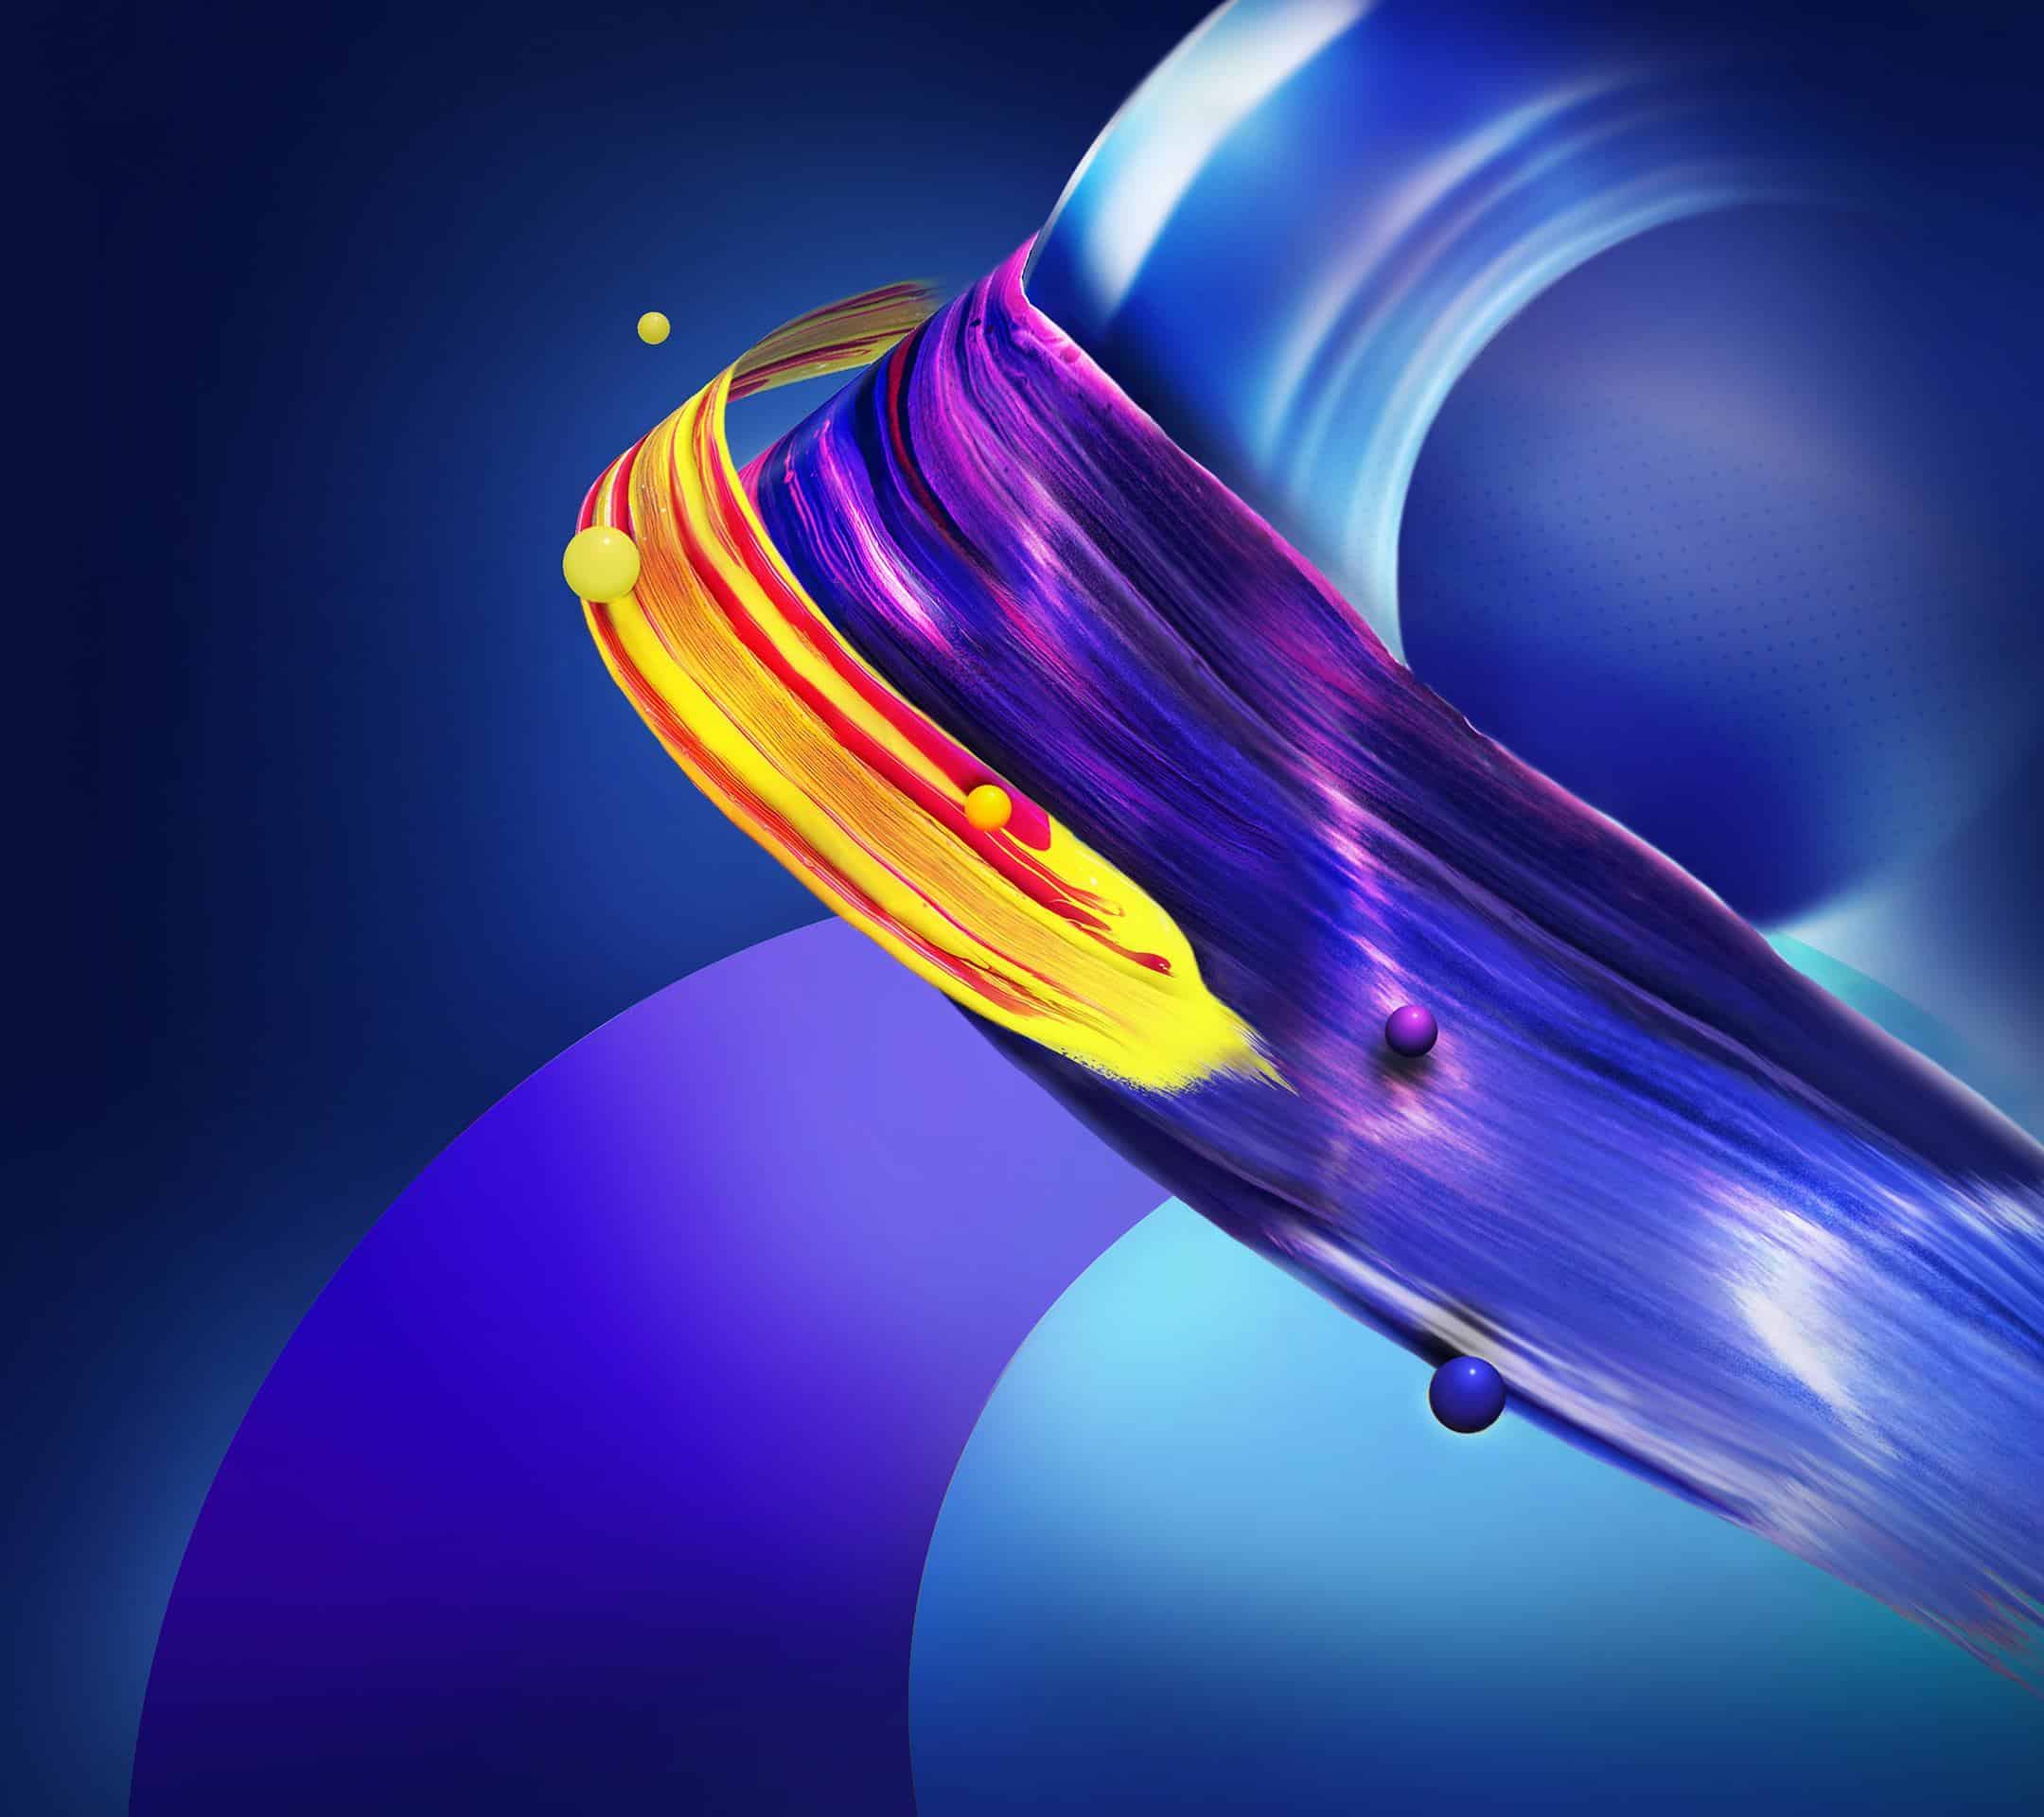 Huawei Honor 9 Stock Wallpapers Download In High Resolution